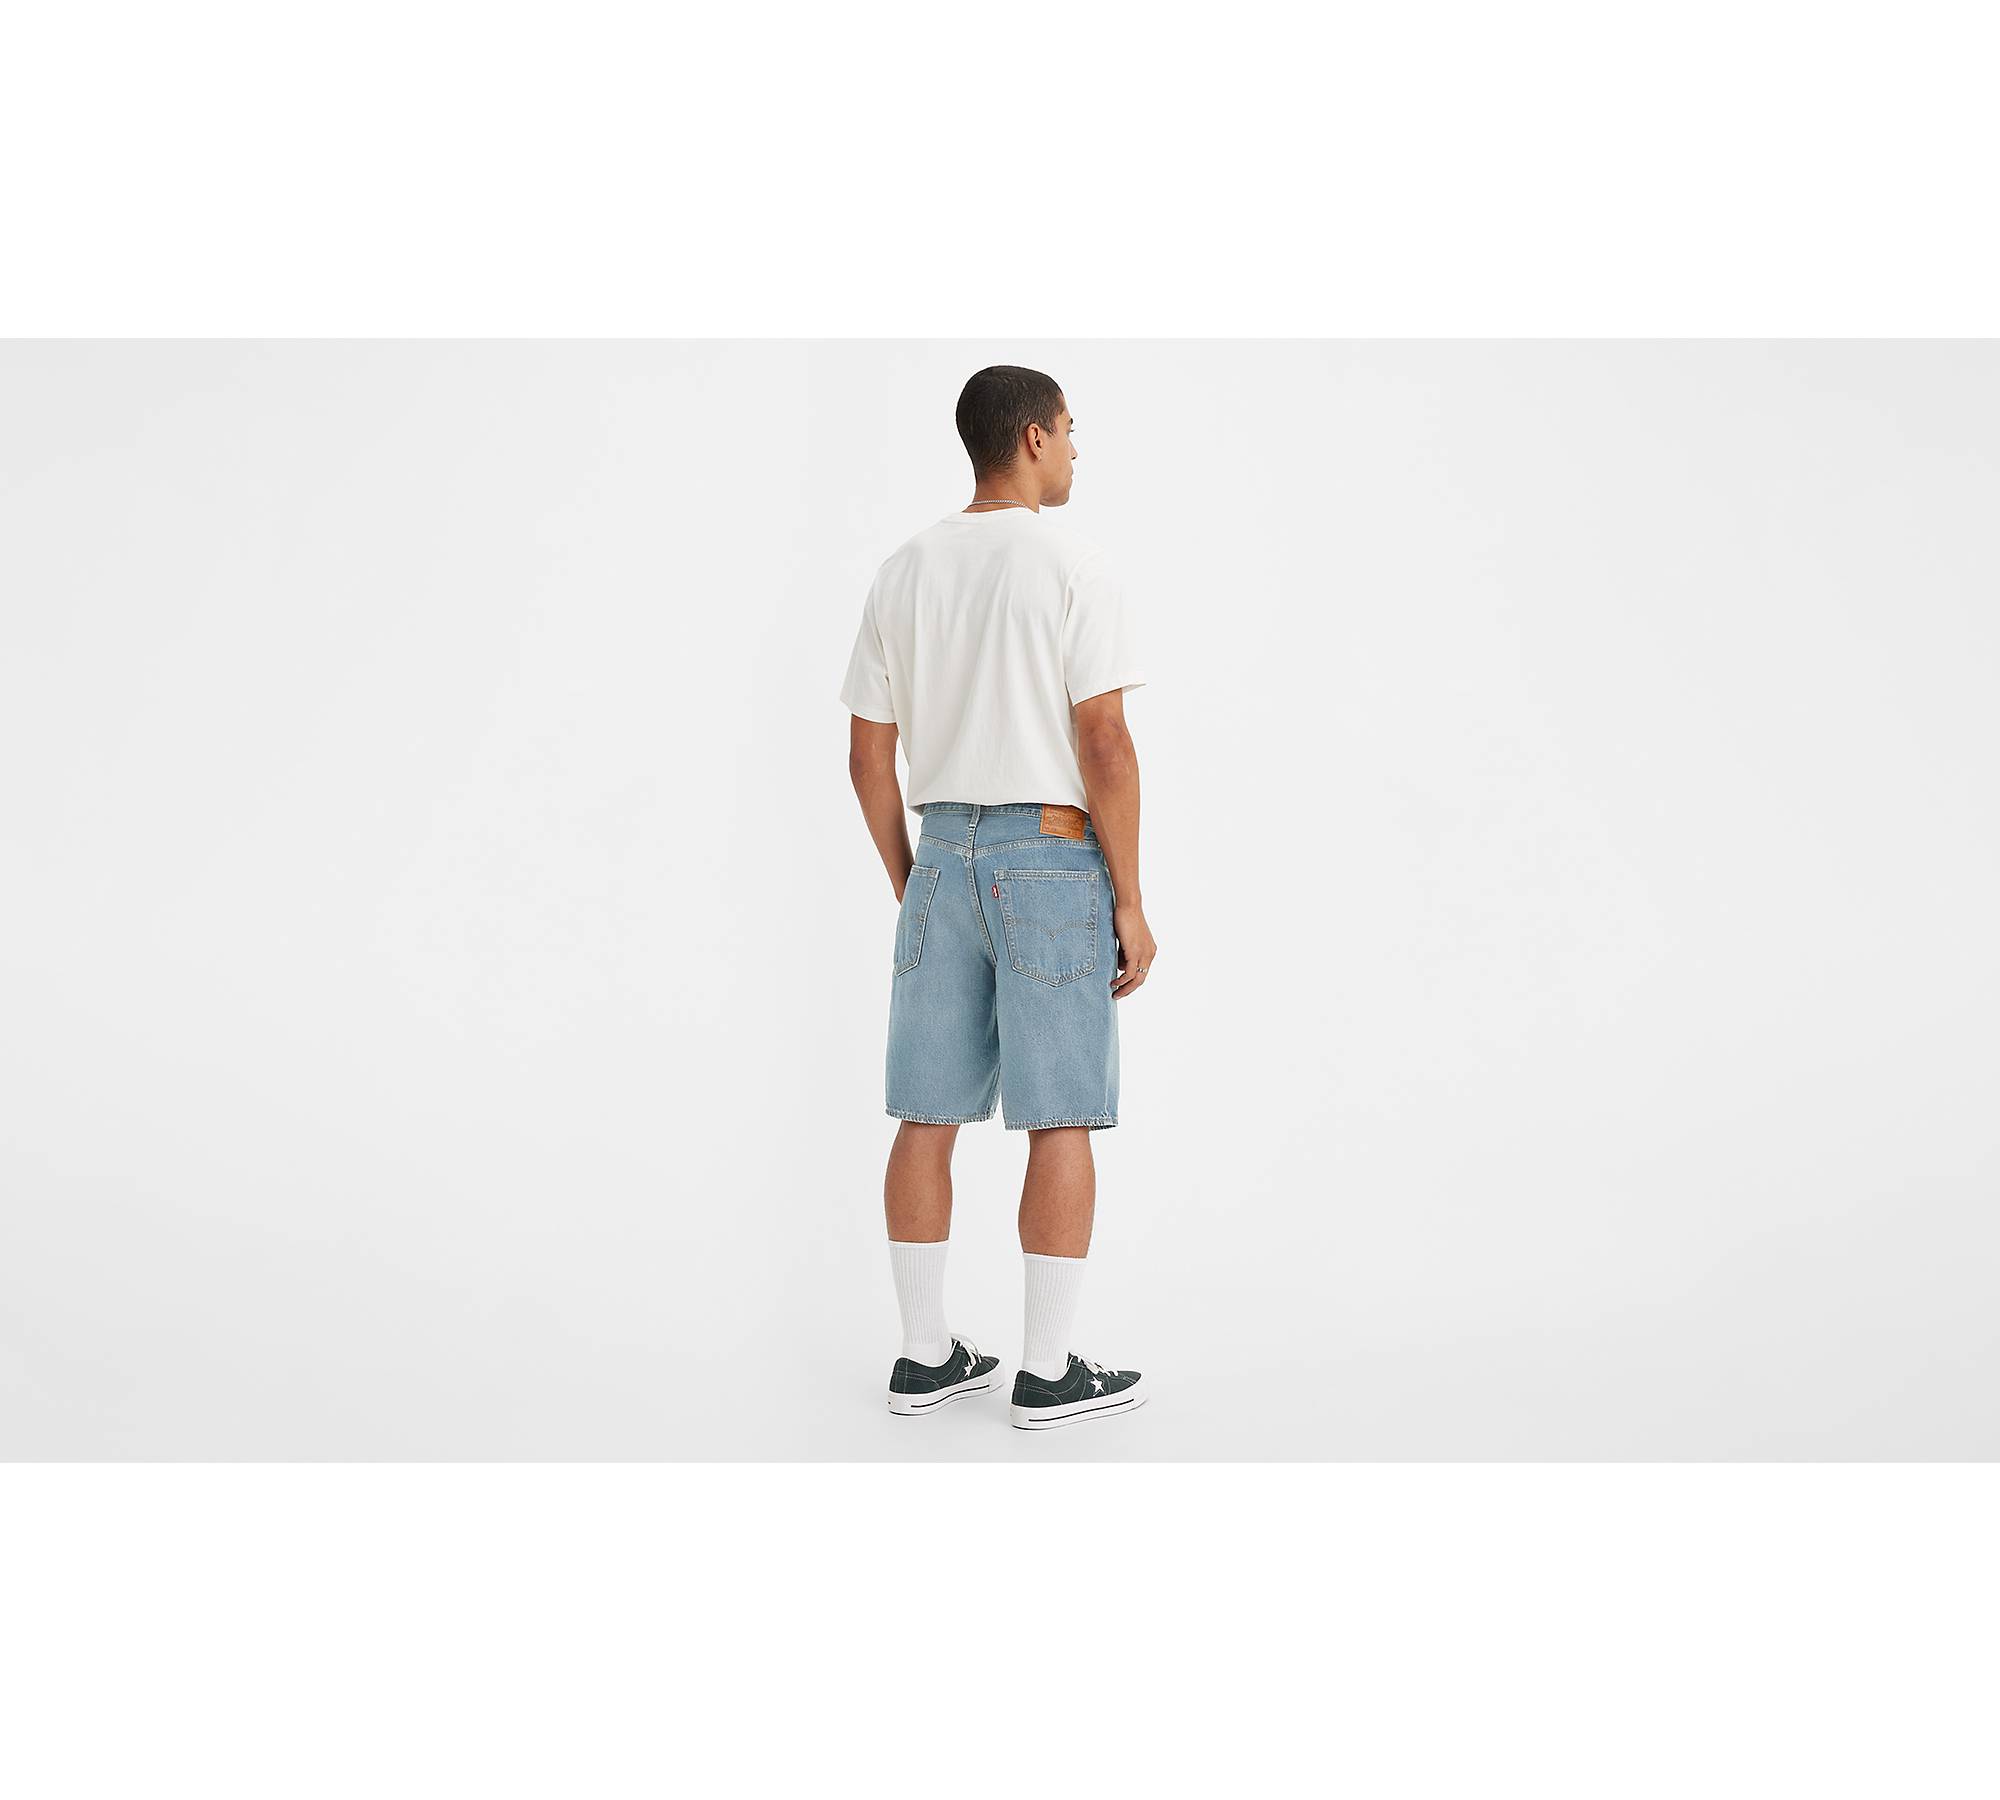 479 Stay Baggy 9.5 Men's Shorts - Light Wash